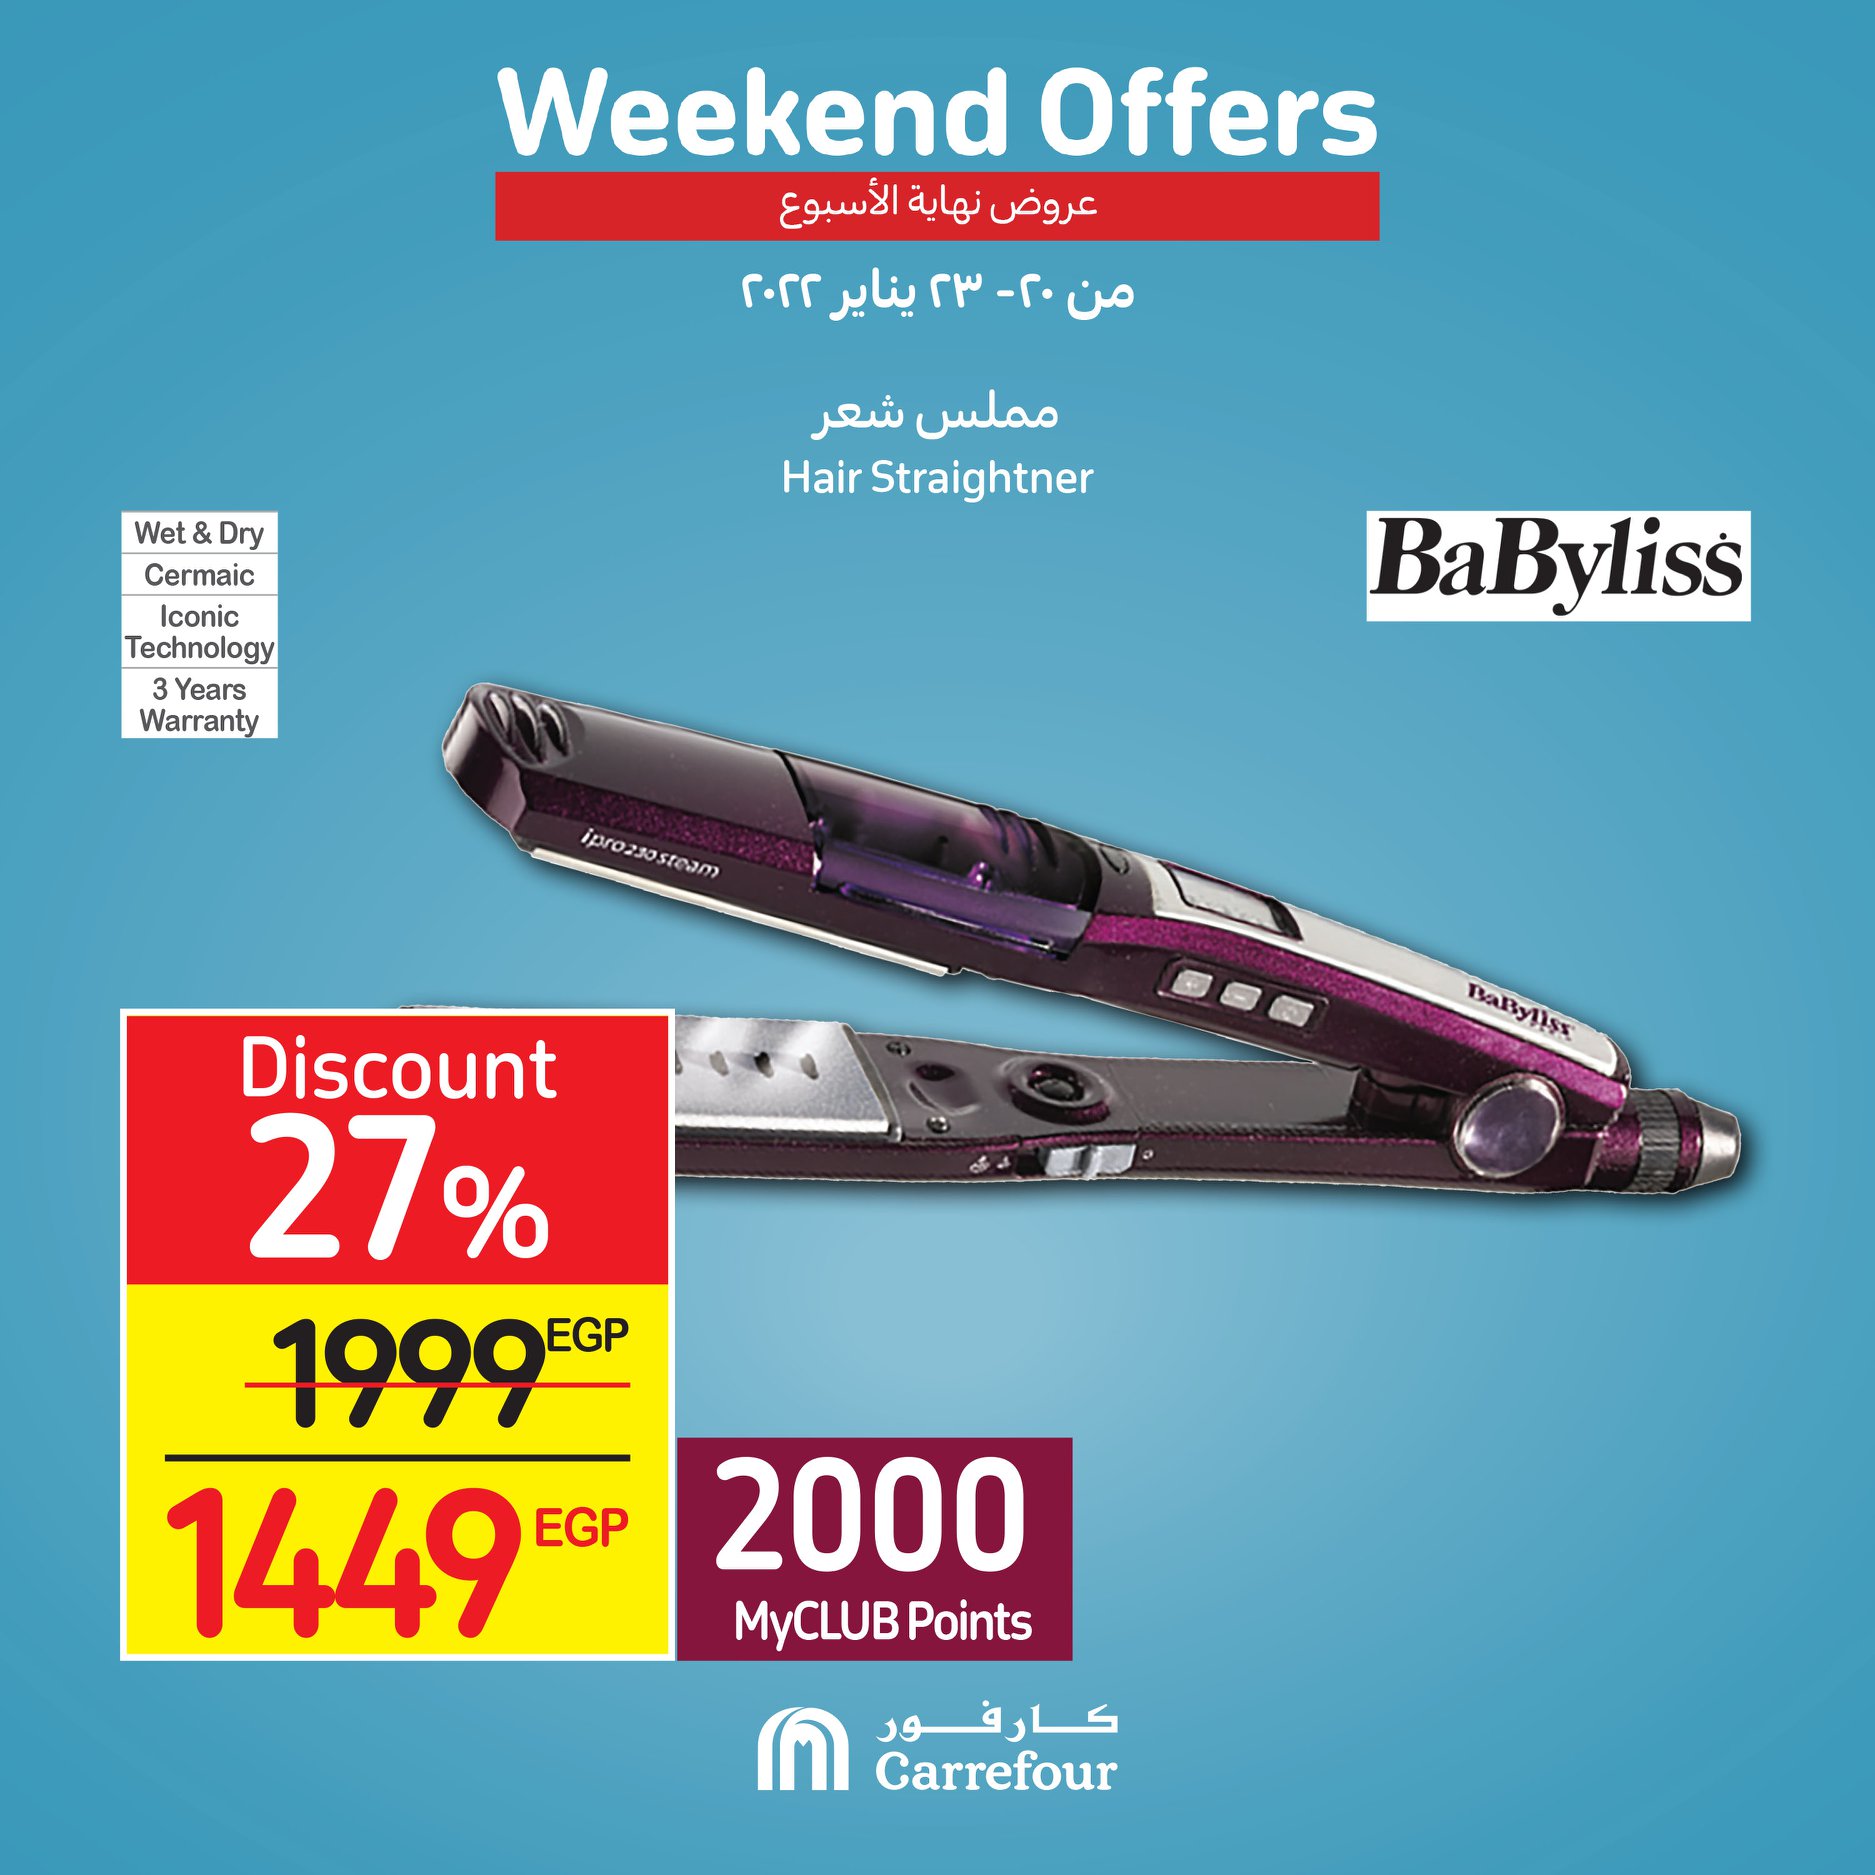 Watch Carrefour's gifts and surprises in the week and prices at dirt cheap 16